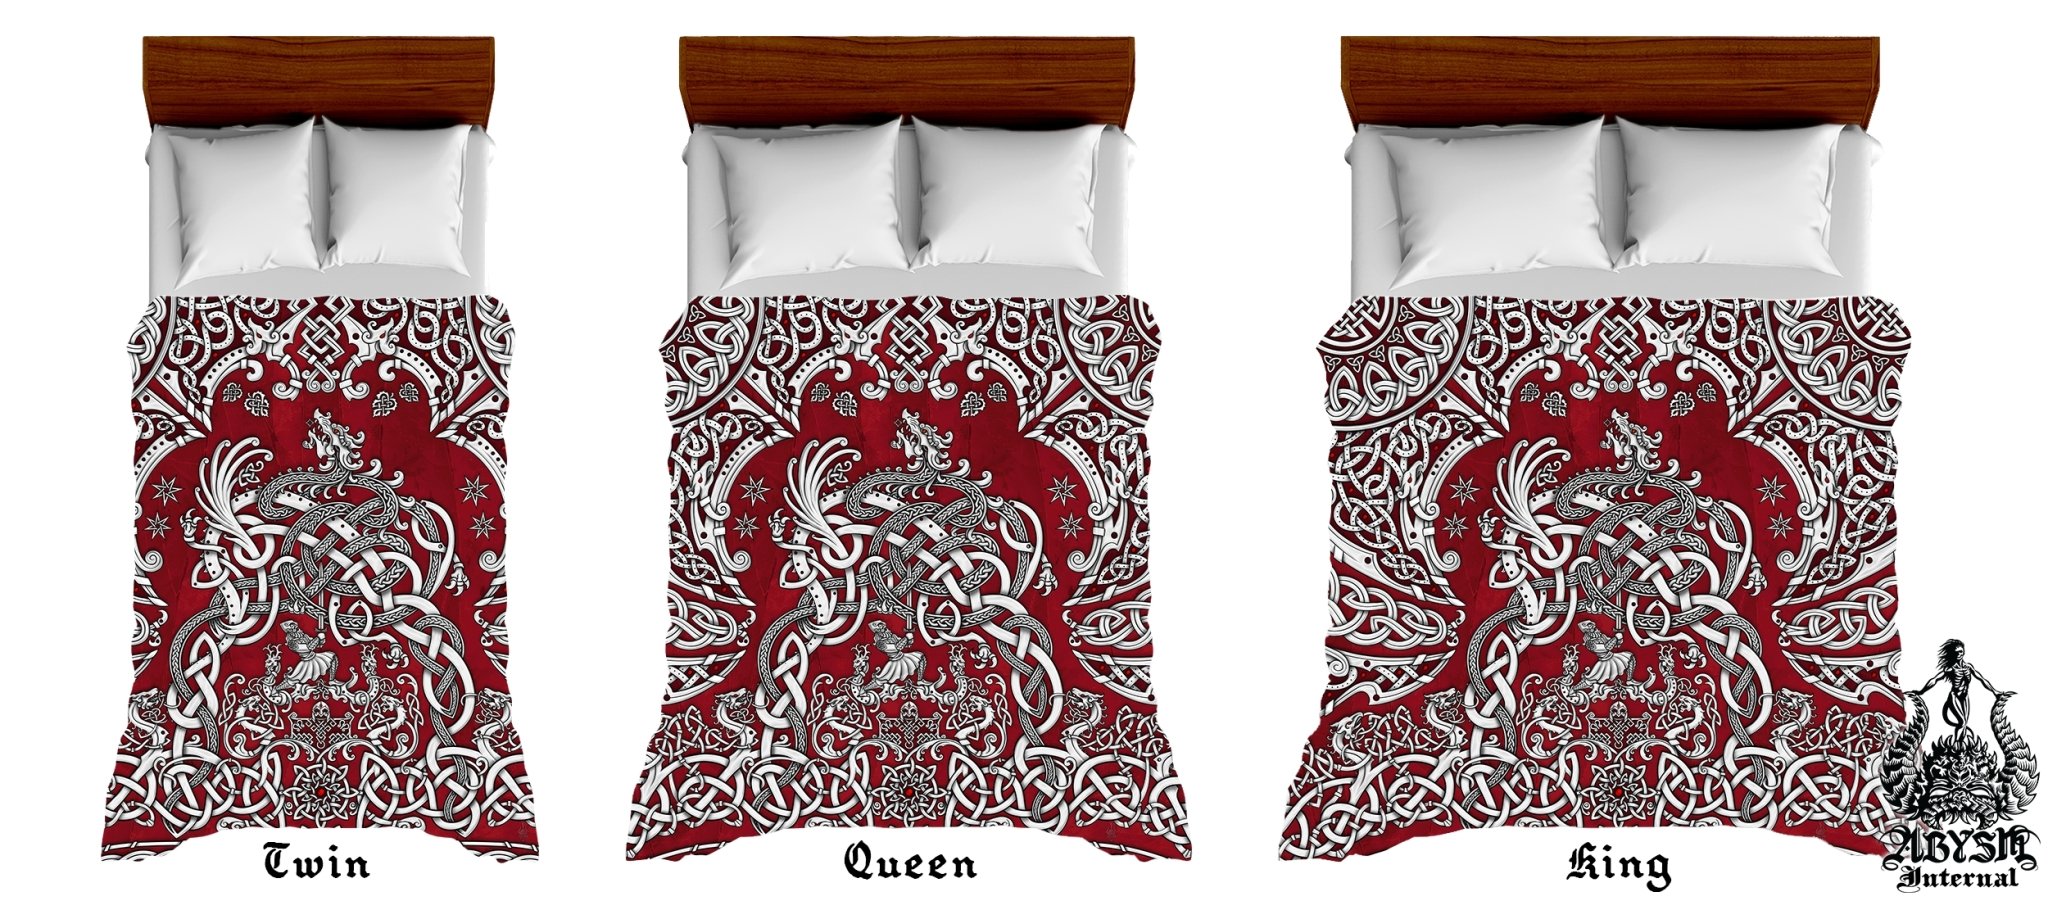 Viking Bedding Set, Comforter and Duvet, Norse Bed Cover and Bedroom Decor, Nordic Art, Sigurd kills Dragon Fafnir, King, Queen and Twin Size - White Red - Abysm Internal